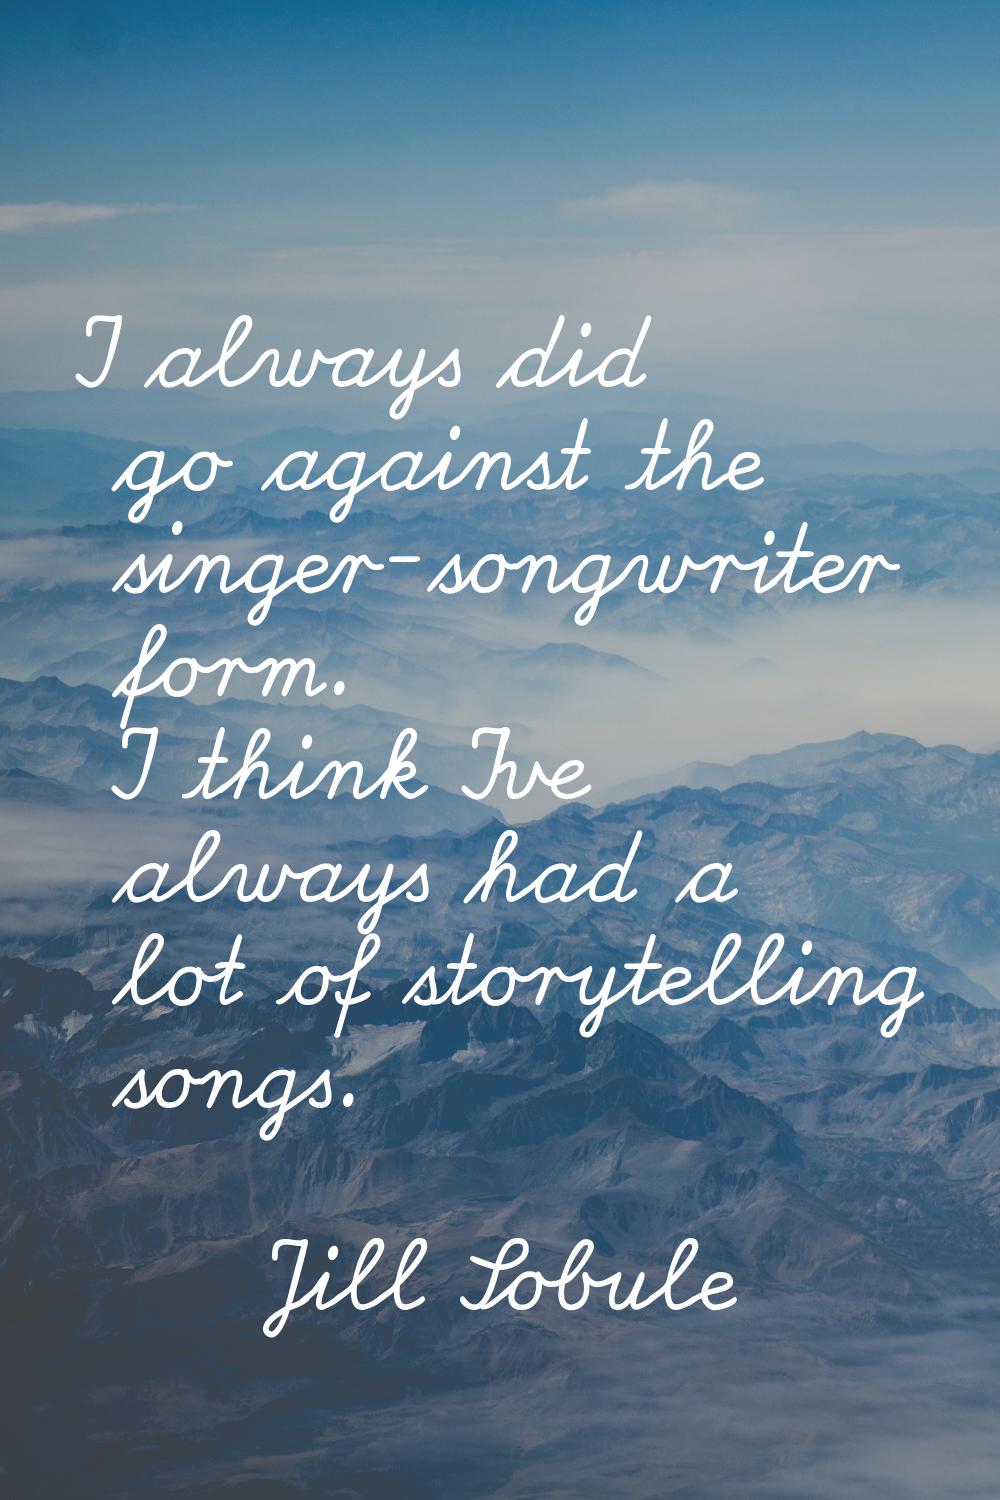 I always did go against the singer-songwriter form. I think I've always had a lot of storytelling s